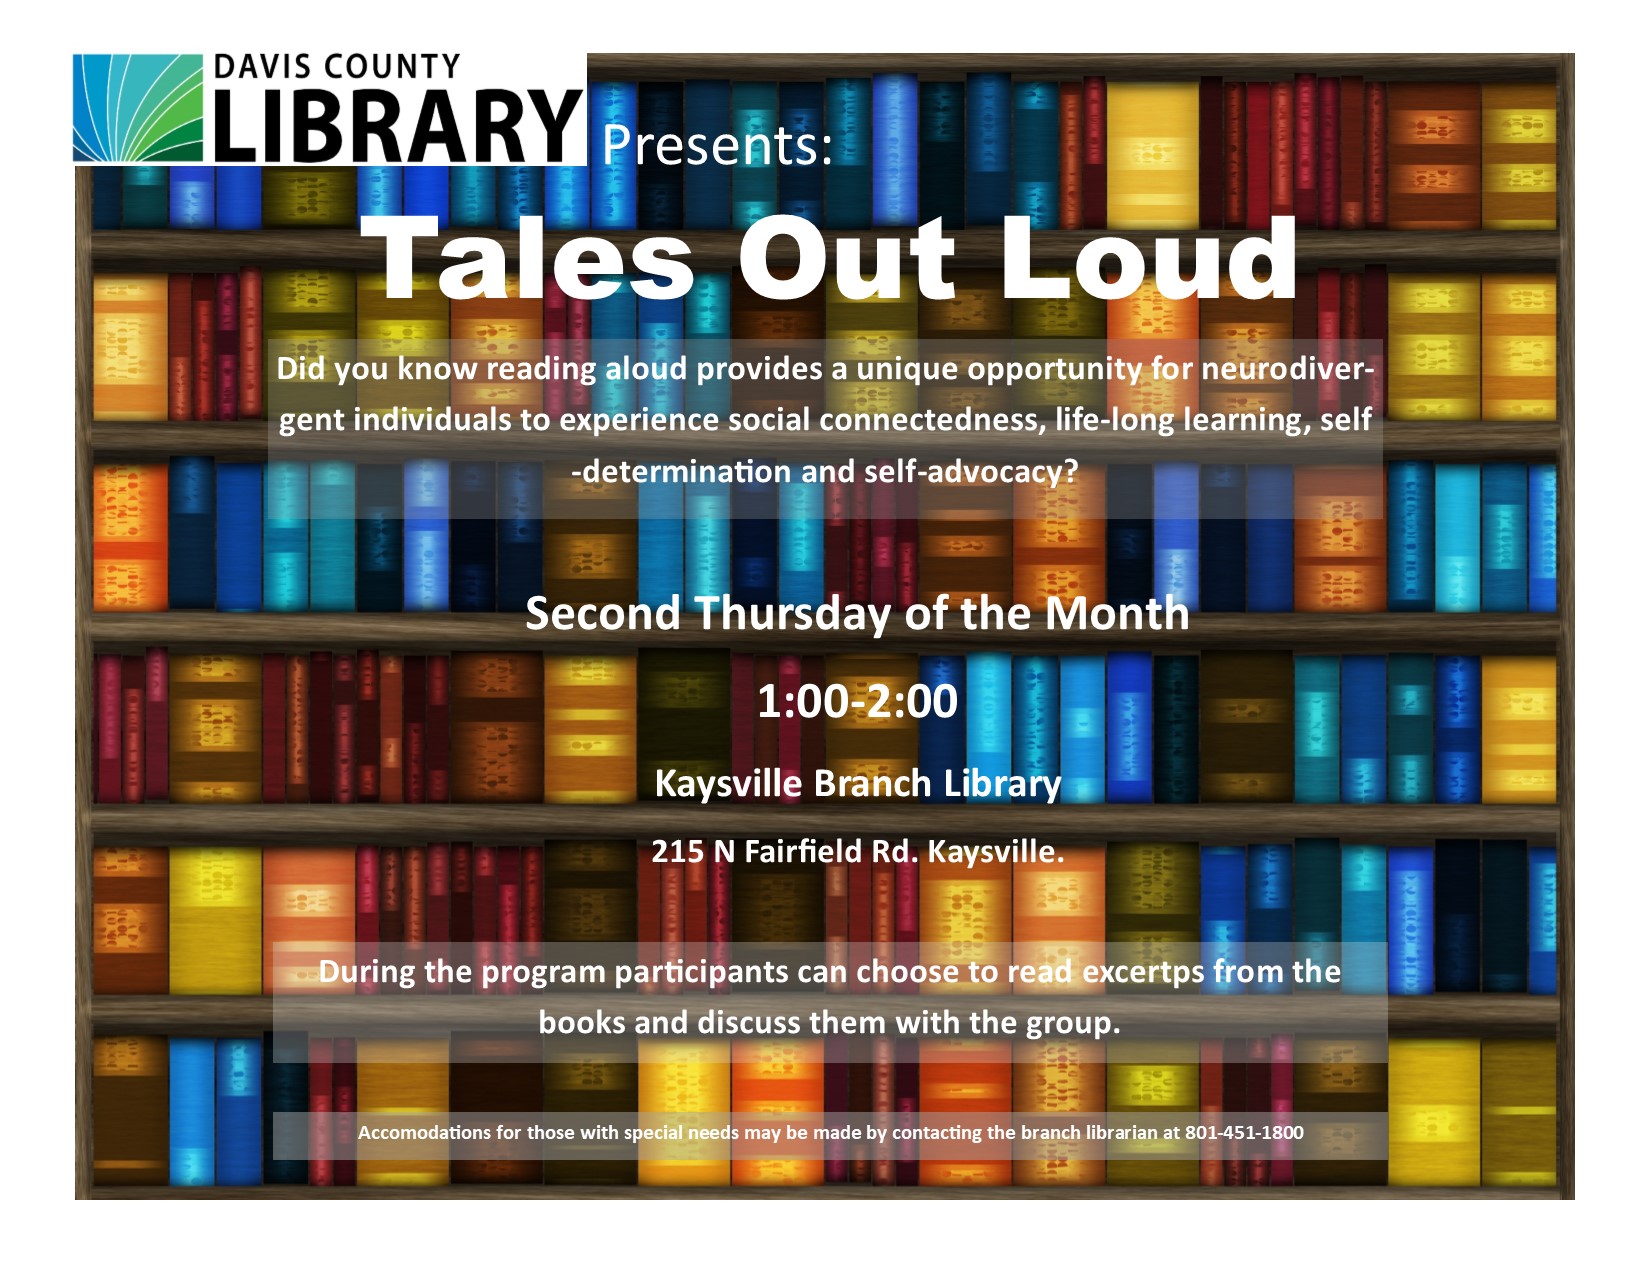 Tales Out Loud meets on the 2nd Thursday of the month at 1pm